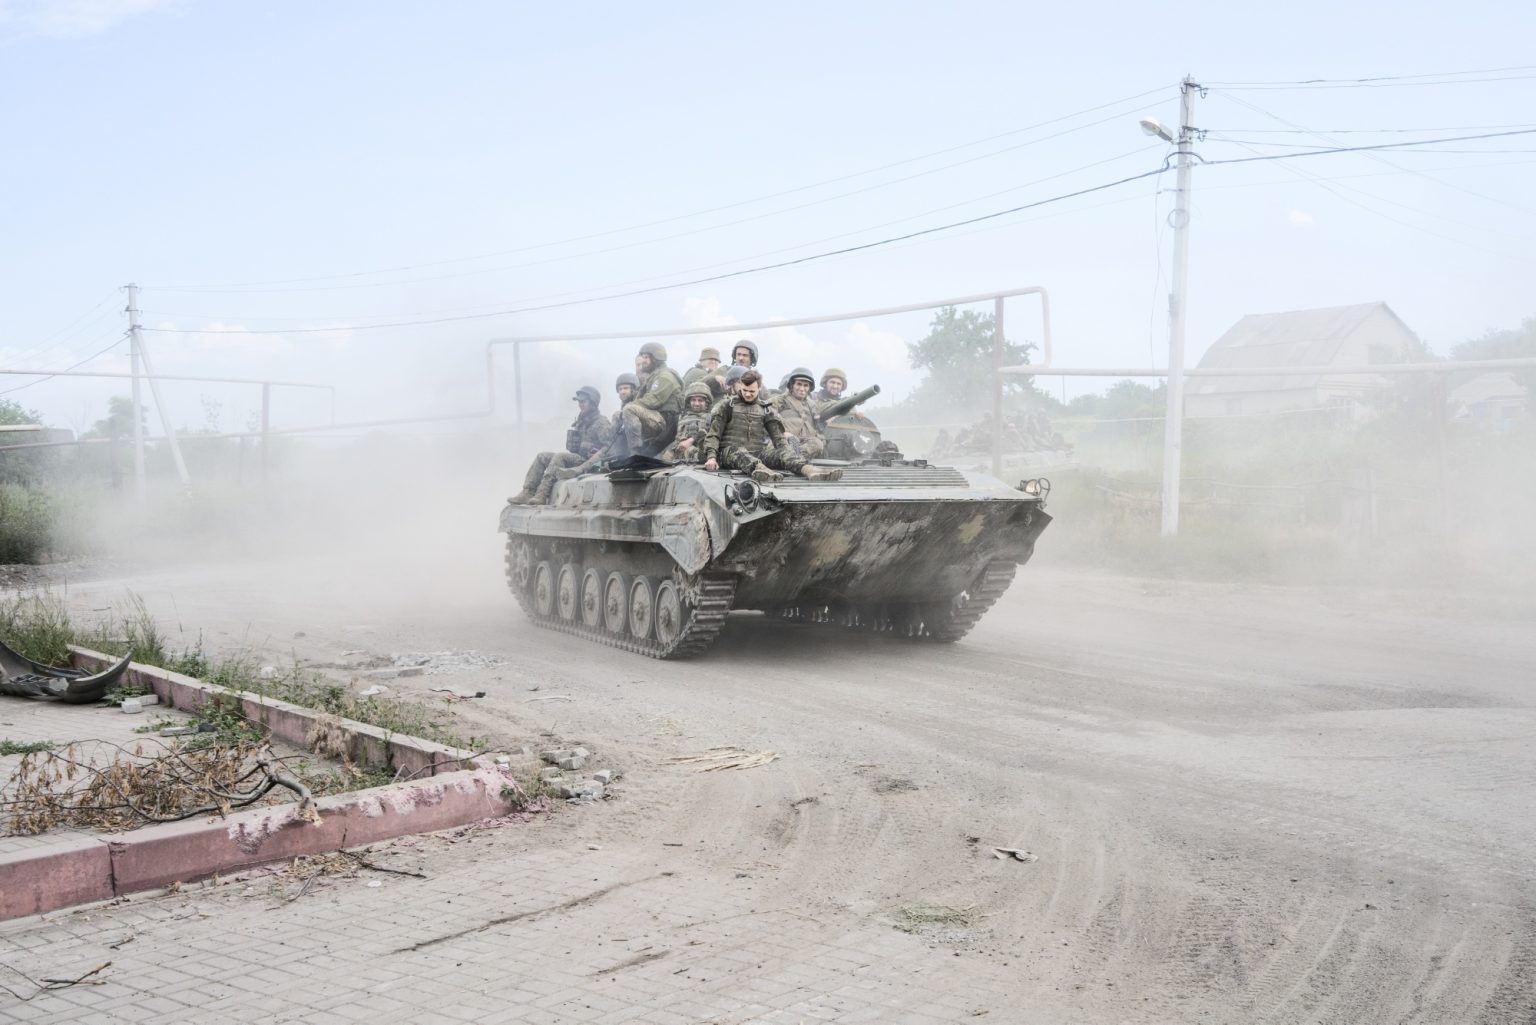 UKRAINE, Donetsk Oblast. June 23, 2022 - Ukrainian servicemen stand on top of an armored vehicle on the road out form Lysychansk to Bakhmut, while fighting raged in the city of Sievierodonetsk.